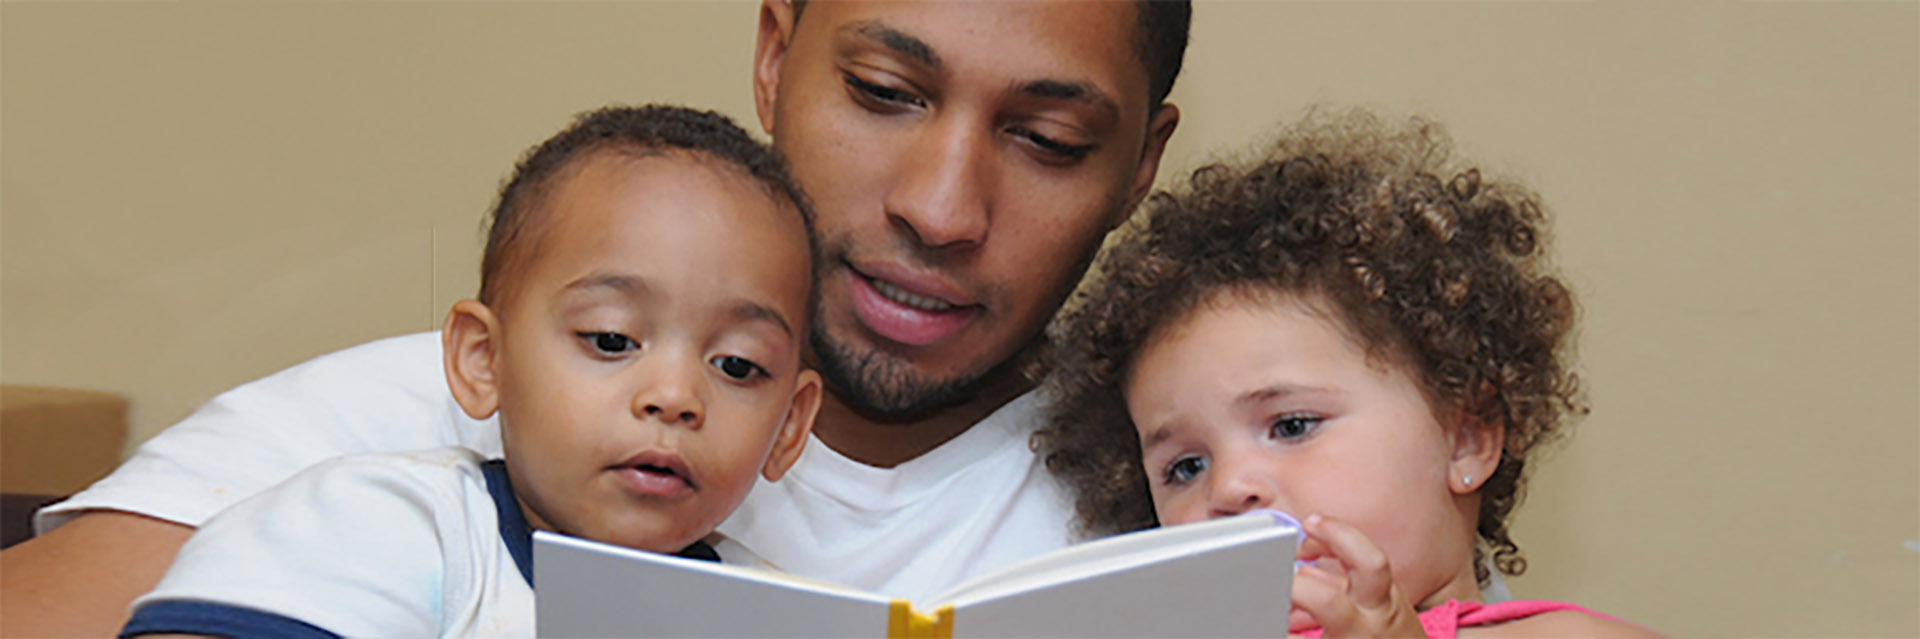 Dad reading books to kids